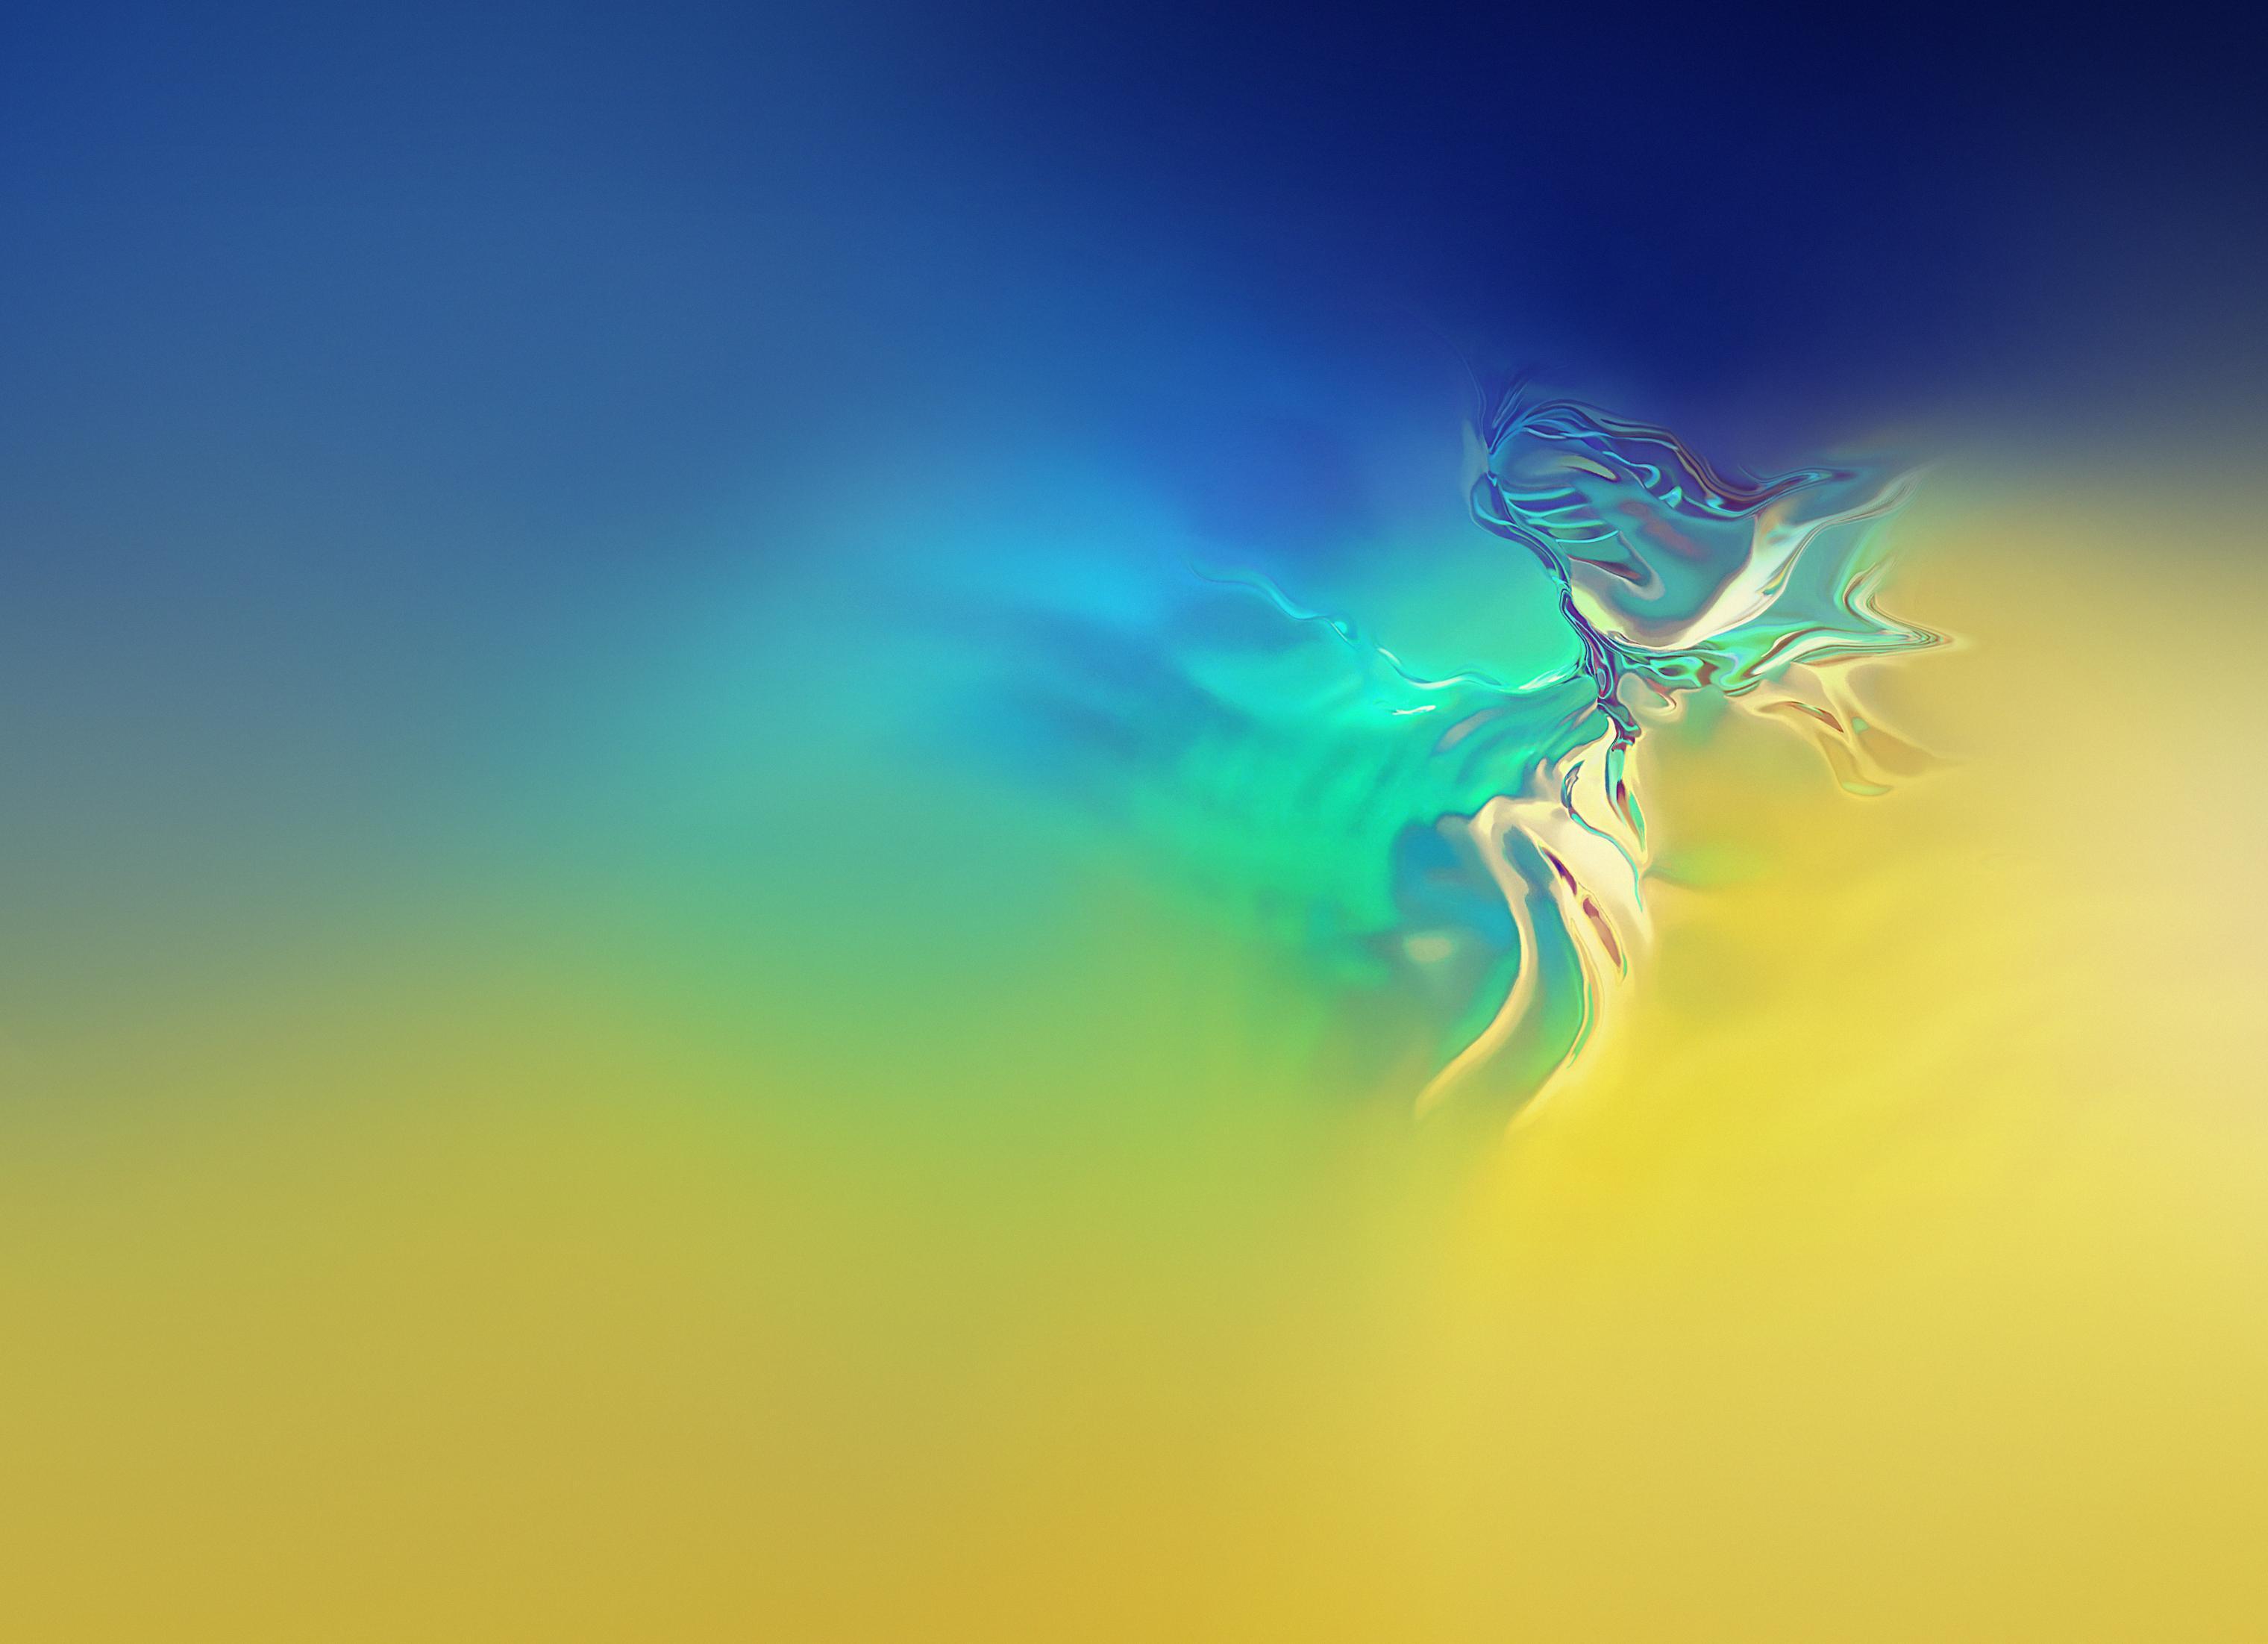 Stock Samsung Galaxy S10 Wallpapers